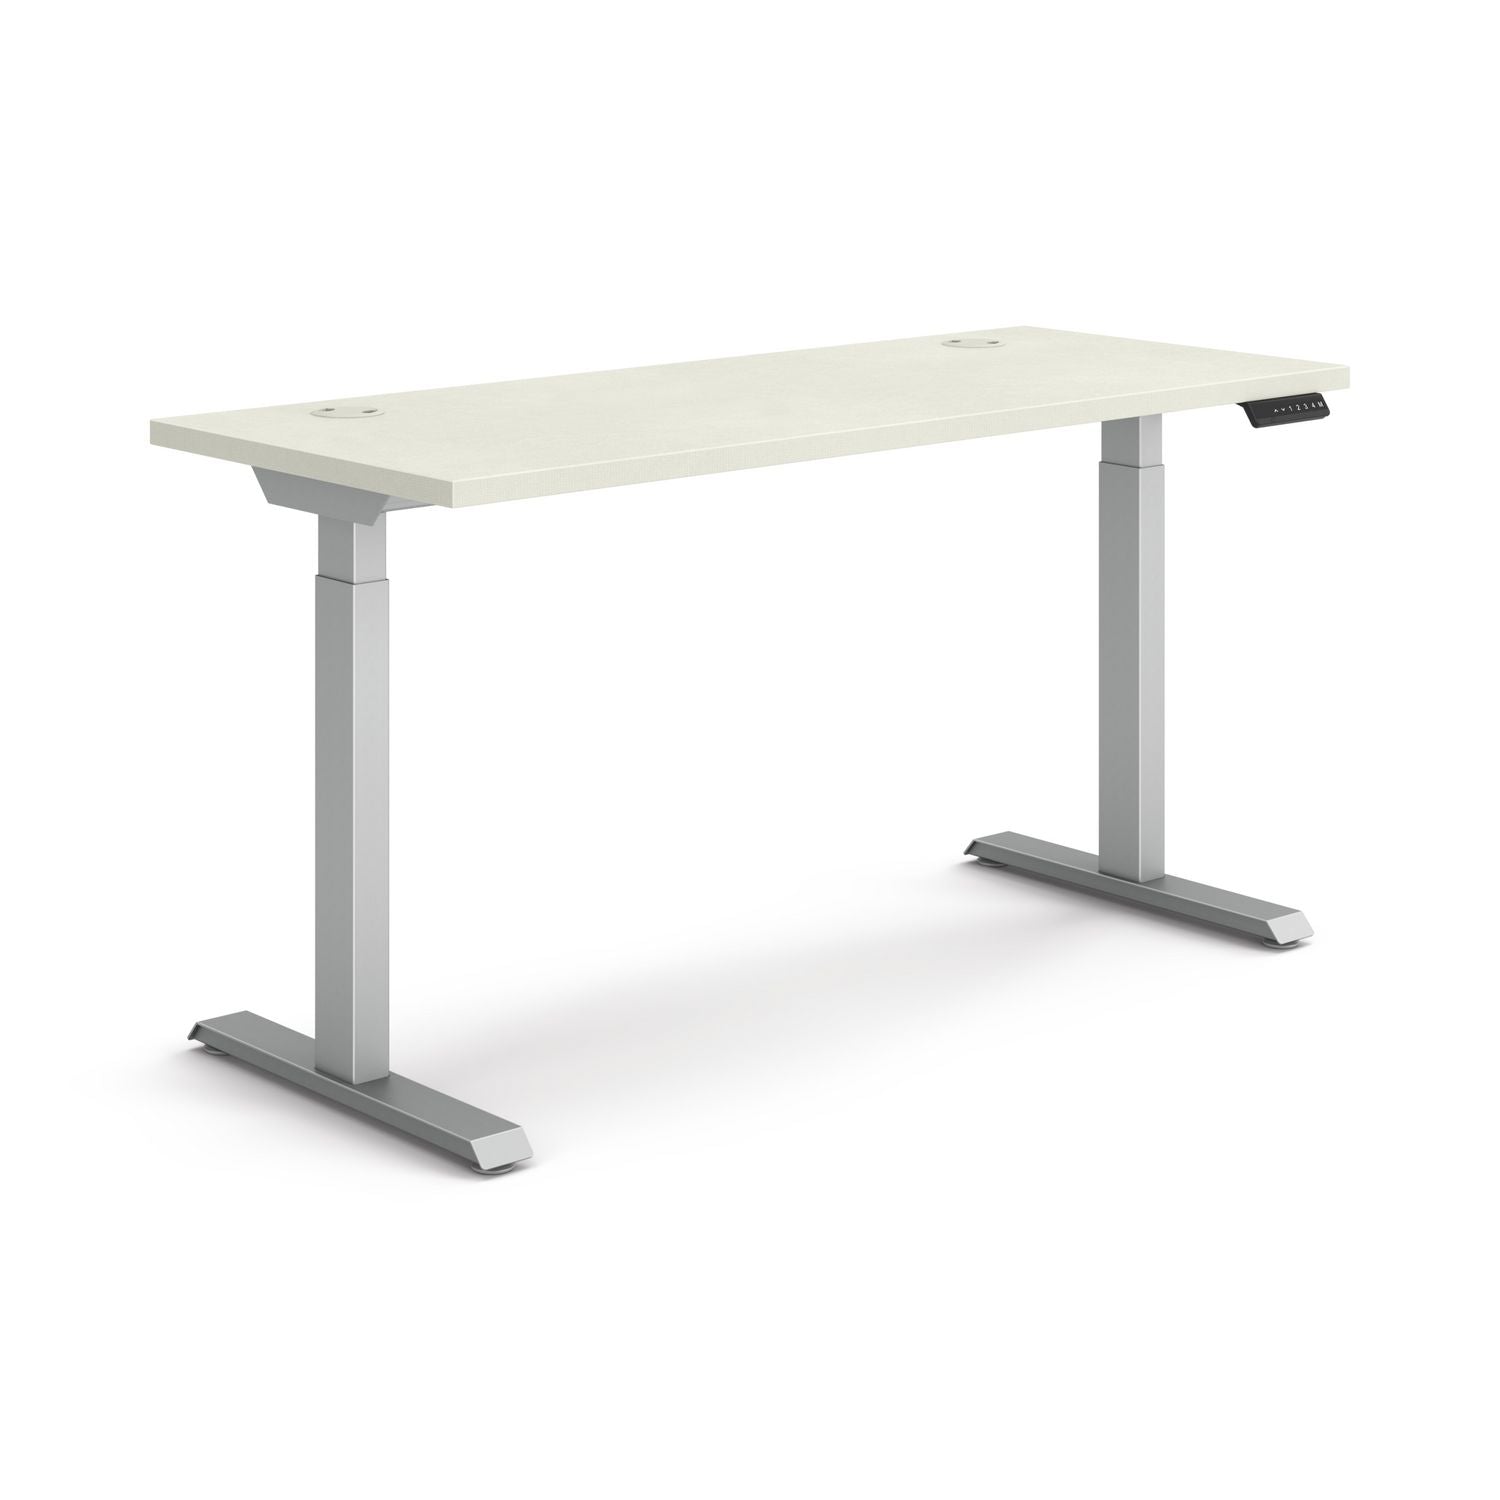 coordinate-height-adjustable-desk-bundle-2-stage-58-x-22-x-2775-to-47-silver-mesh\\silver-ships-in-7-10-business-days_honhat2smsv2258 - 1